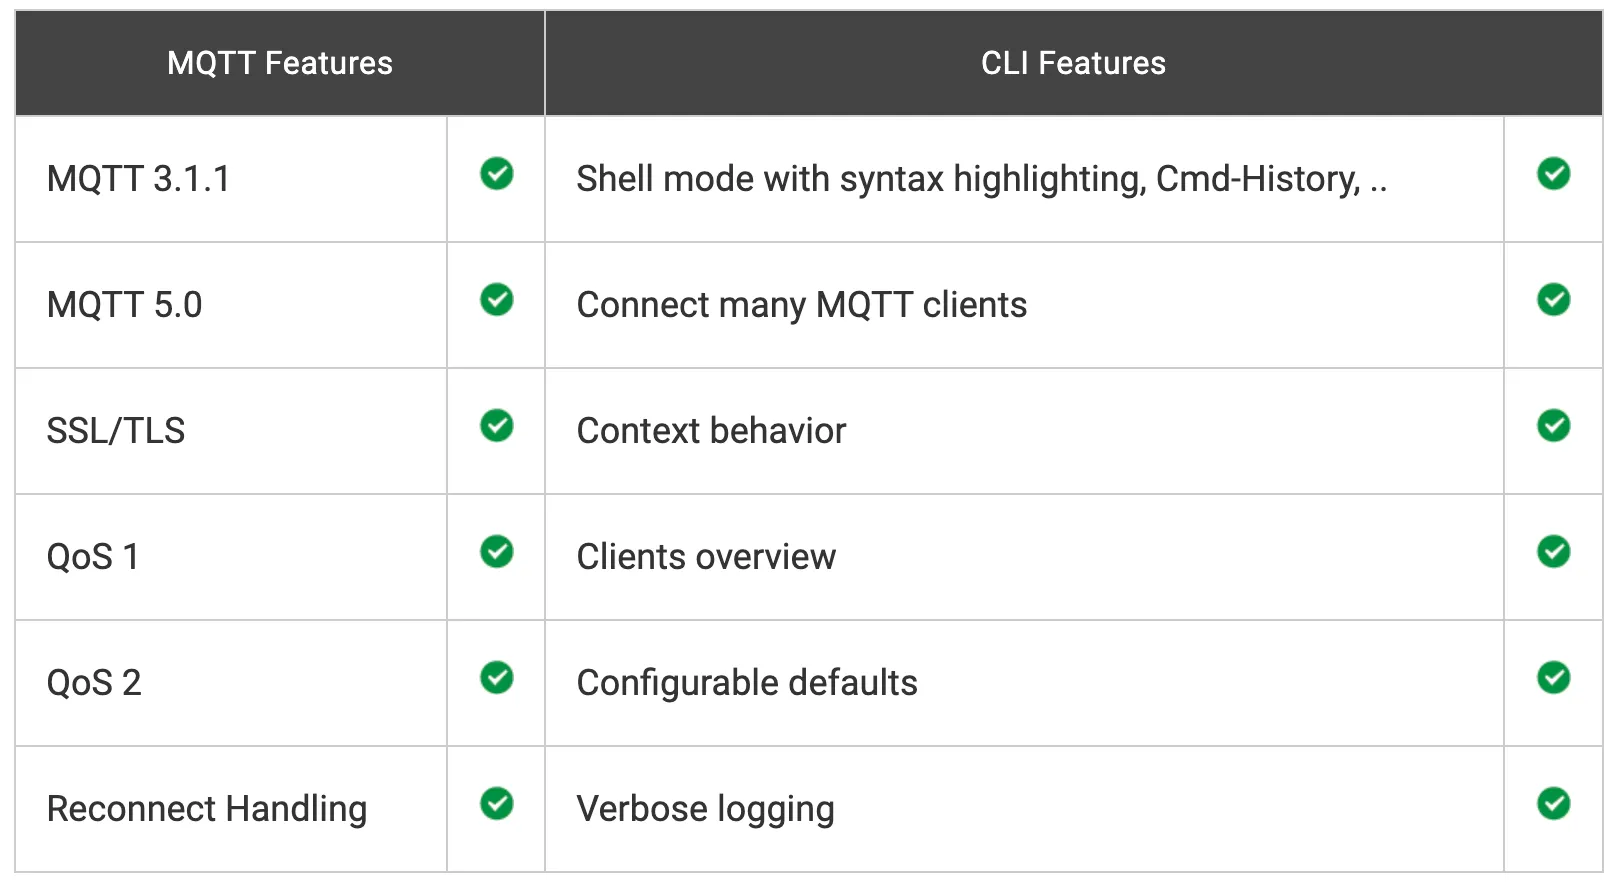 MQTT Features and CLI Features Content Table